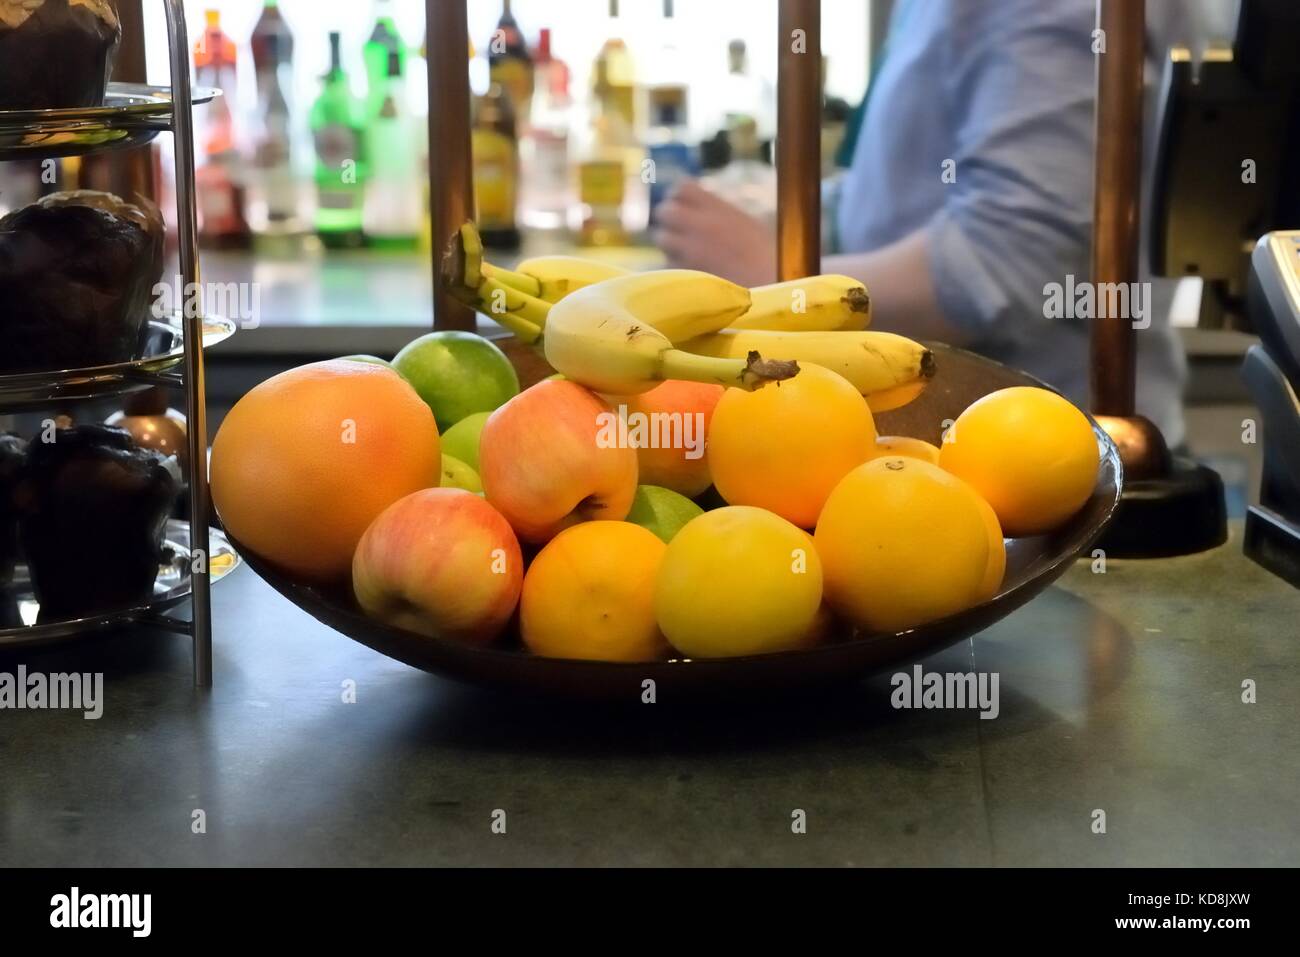 A bowl of fresh fruit on the counter of an airport restaurant. Stock Photo